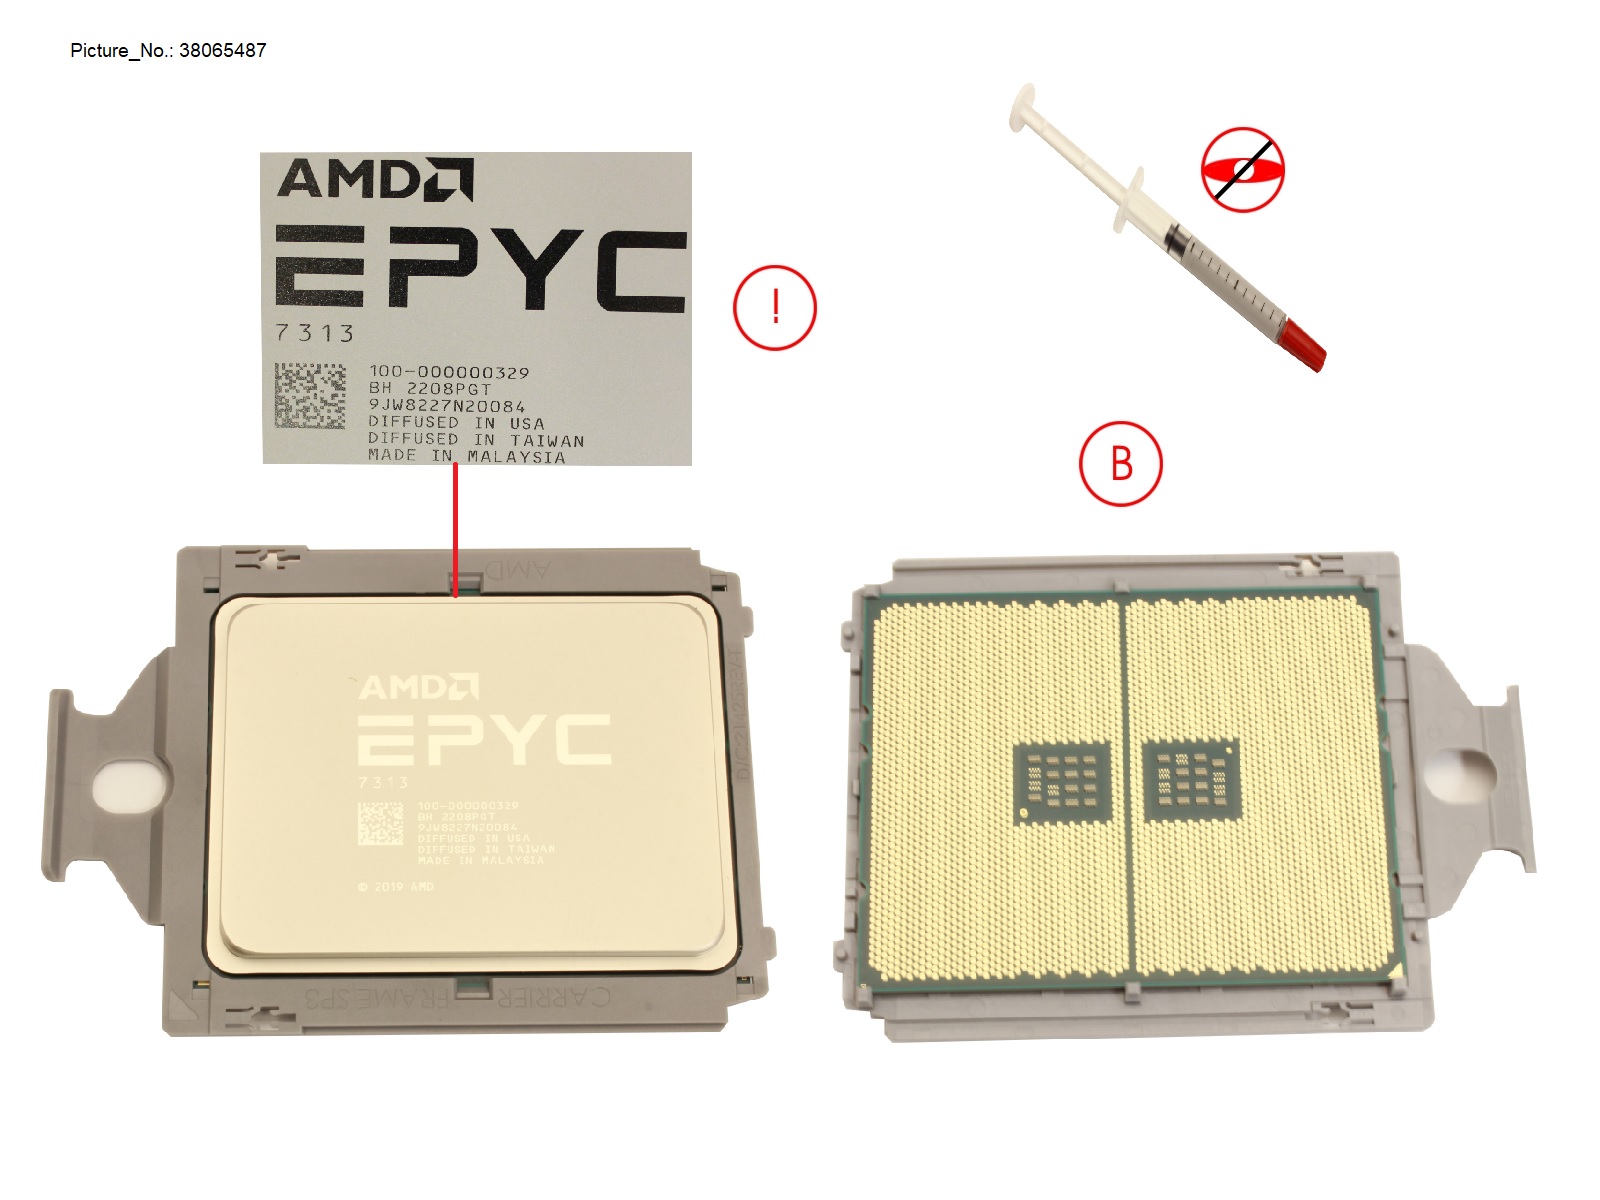 SPARE AMD EPYC 7313 (3GHZ/16CORE/128MB)